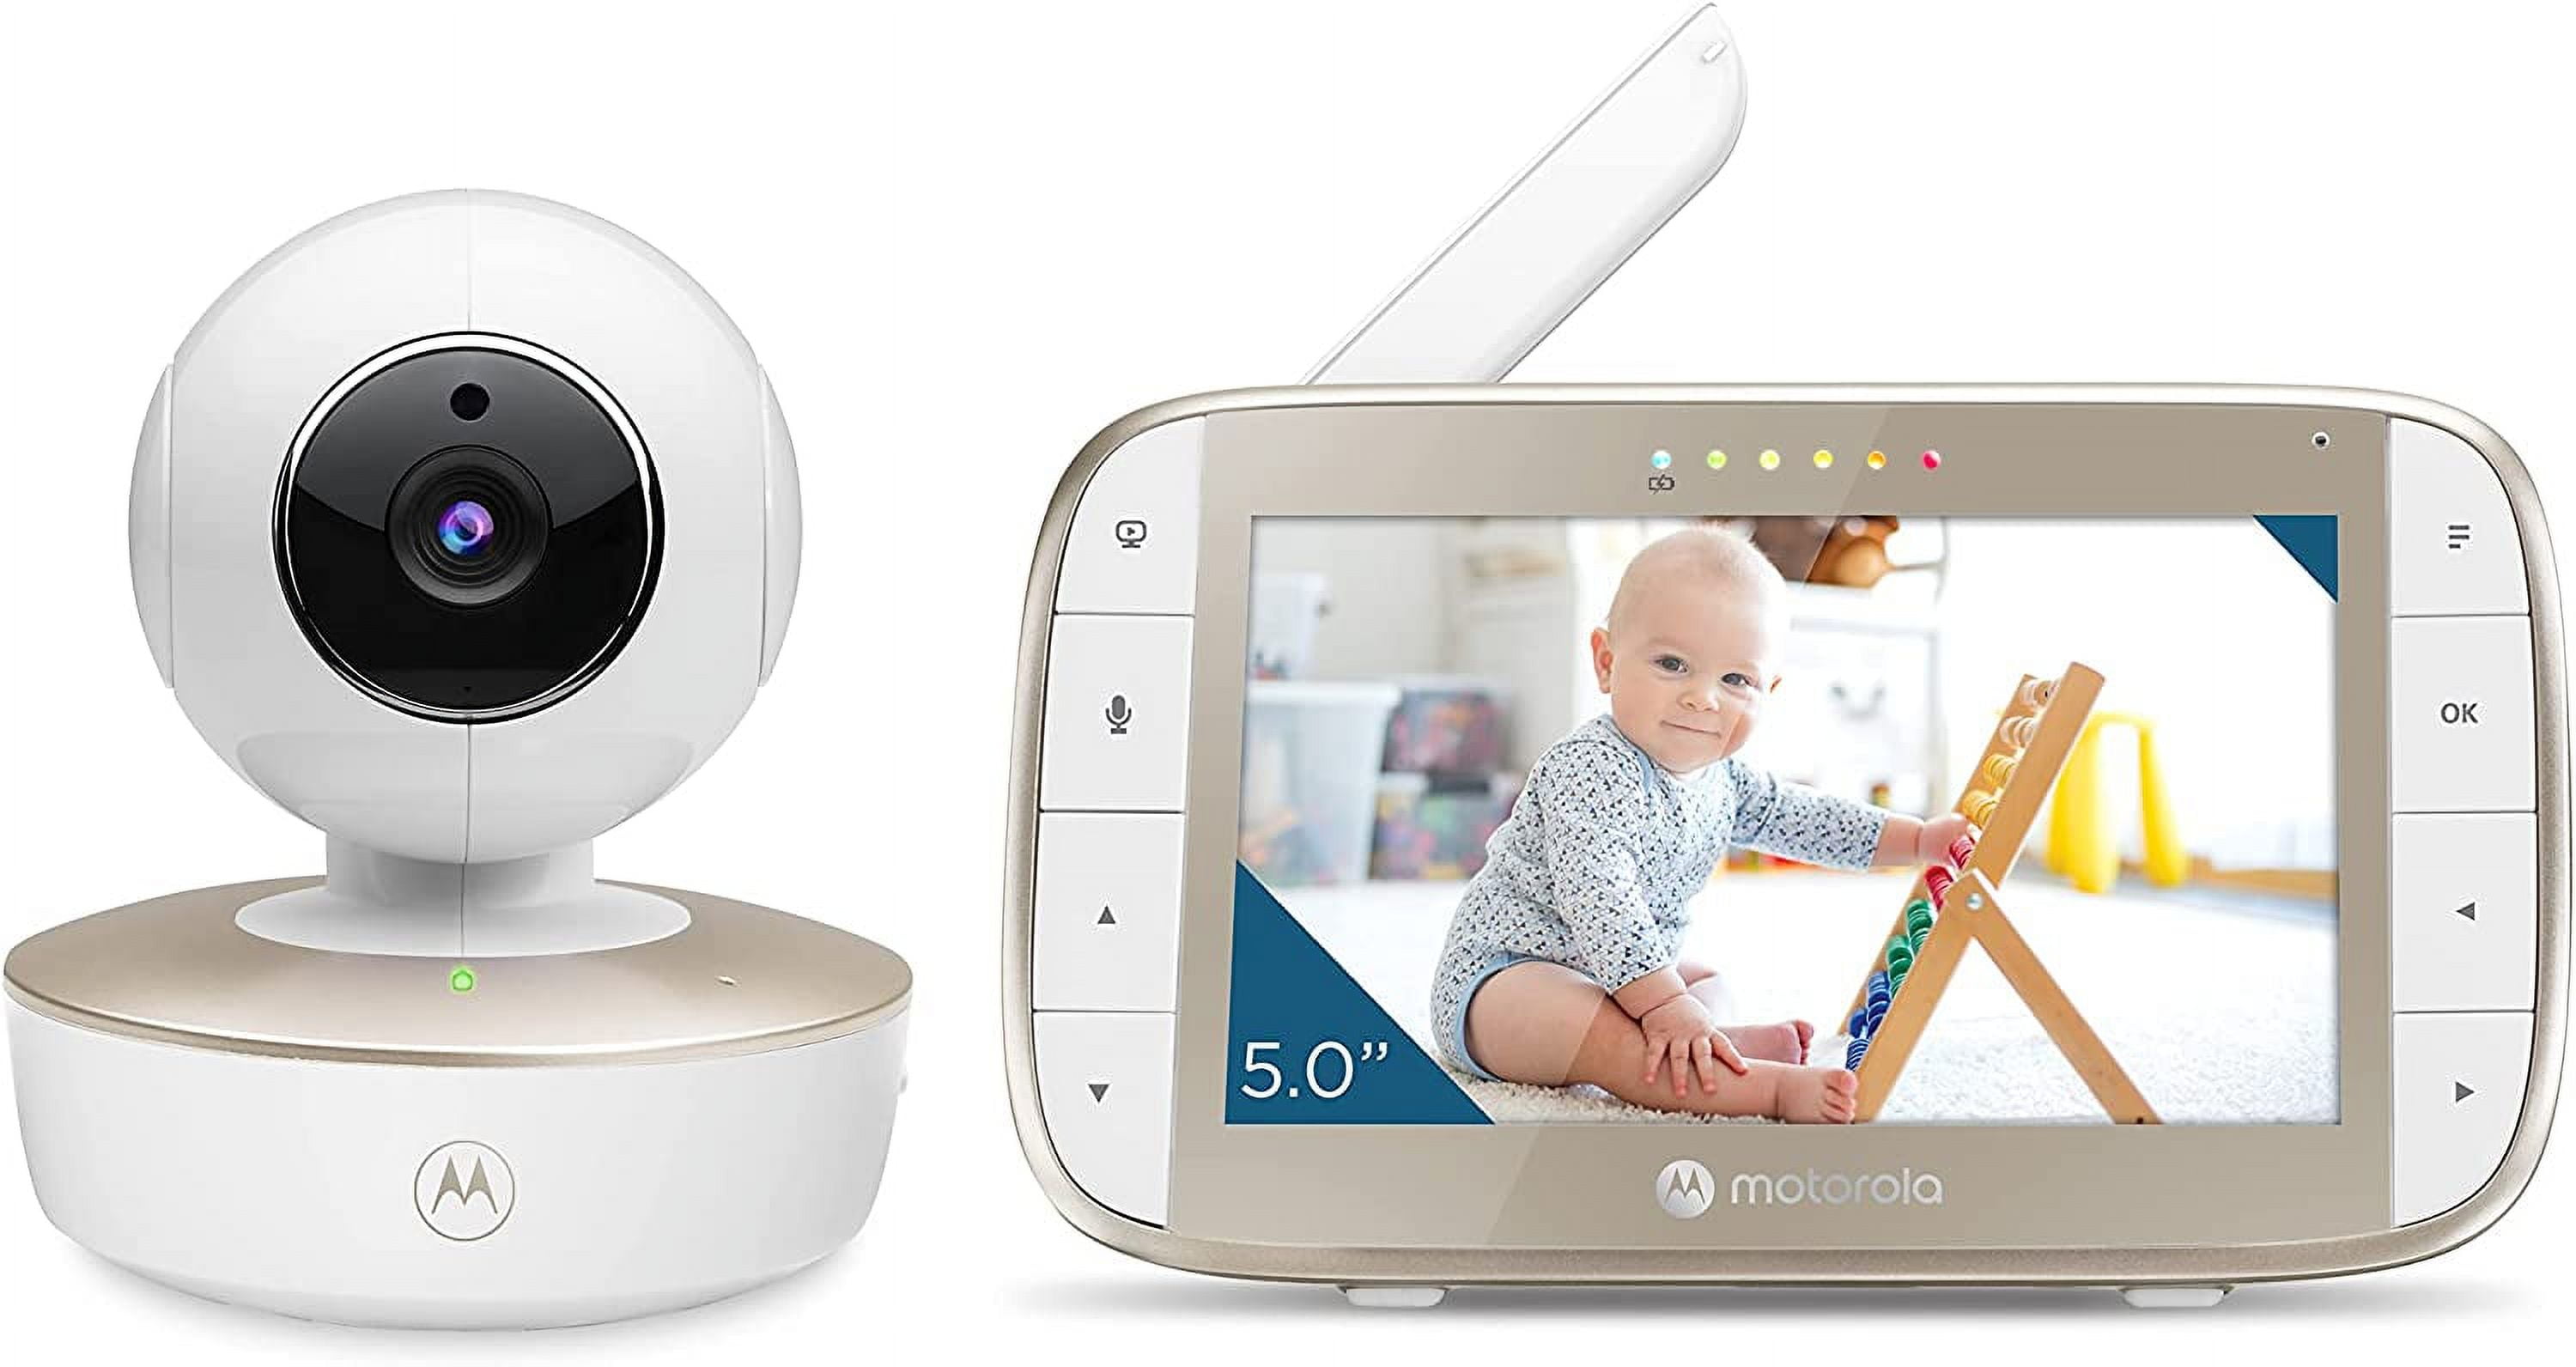 HelloBaby Upgrade Monitor, 5''Sreen with 30-Hour Battery, Pan-Tilt-Zoom  Video Baby Monitor with Camera and Audio, Night Vision, VOX, 2-Way Talk, 8  Lullabies and 1000ft Range No WiFi, Ideal Gifts 